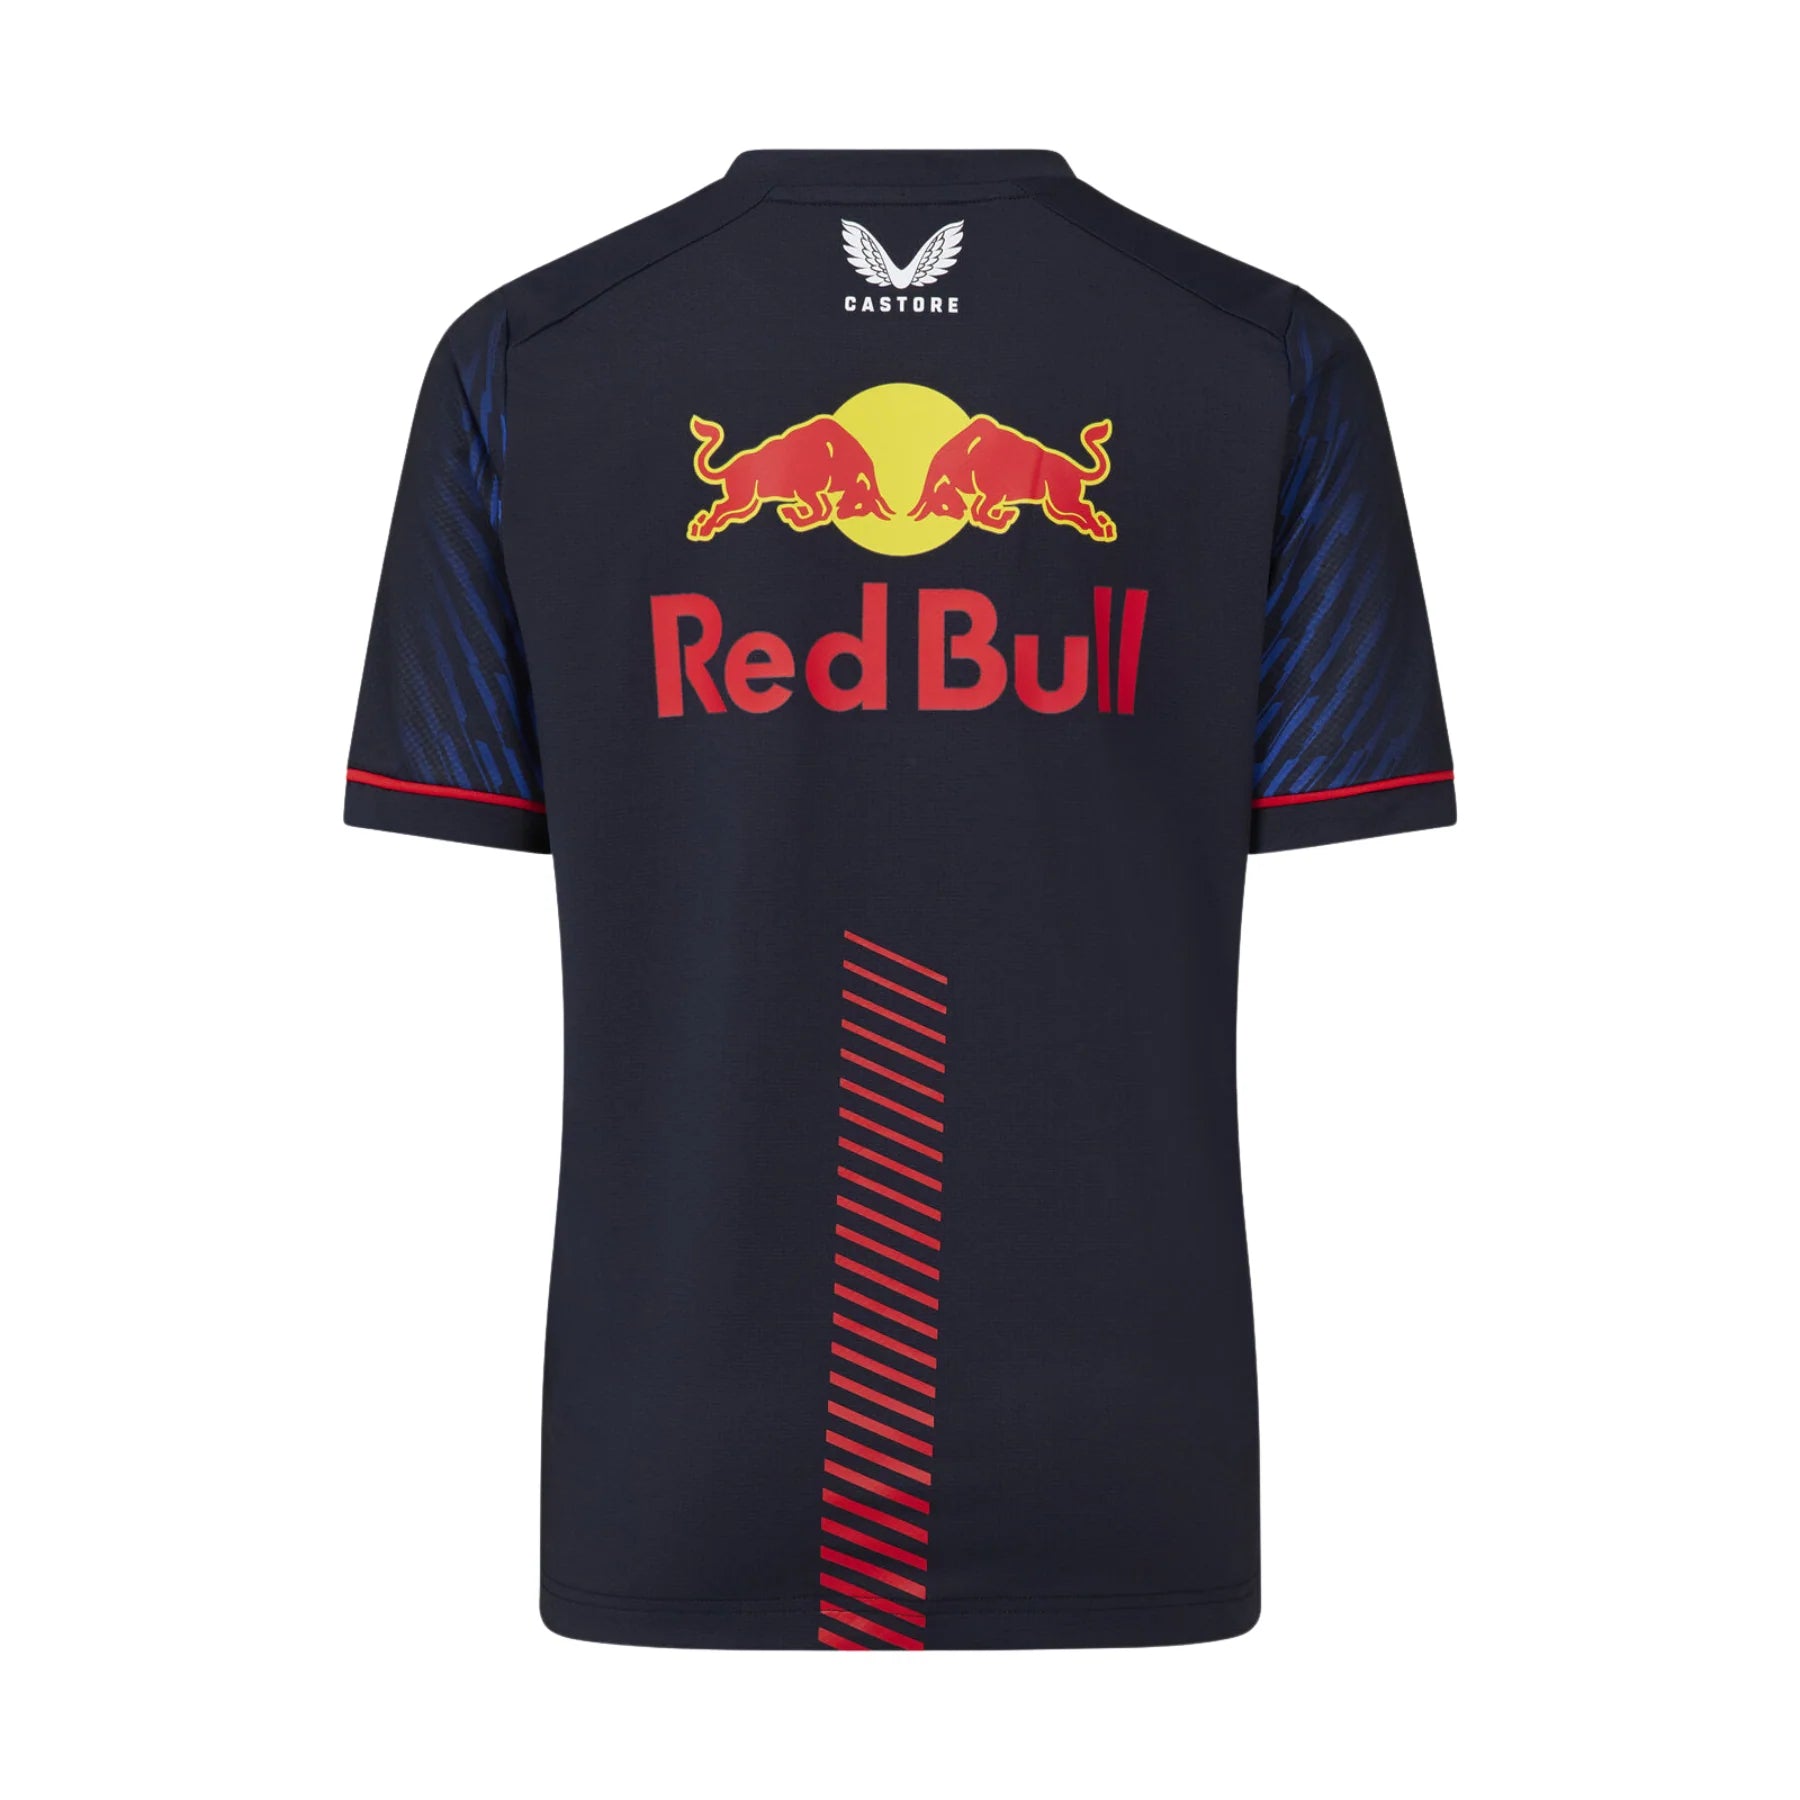 Castore Max Verstappen Driver T Shirt | Red Bull Racing Shirt | Formul 1 Driver T Shirts | F1 Clothing | Color Navy | For Men | Best Wearing in Bahrain | Halabh.com